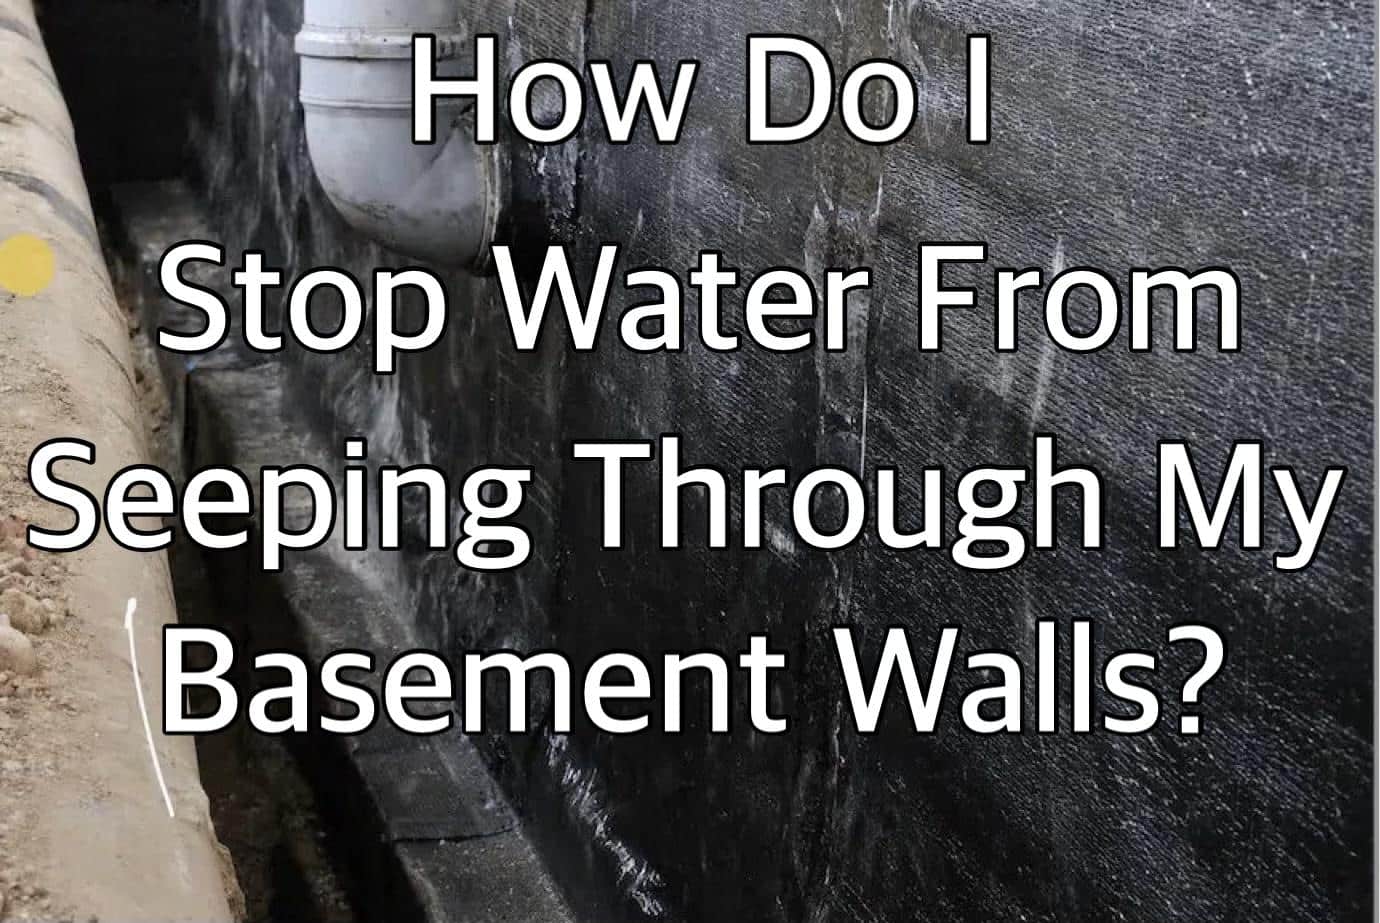 How Do I Stop Water From Seeping Through My Basement Walls?